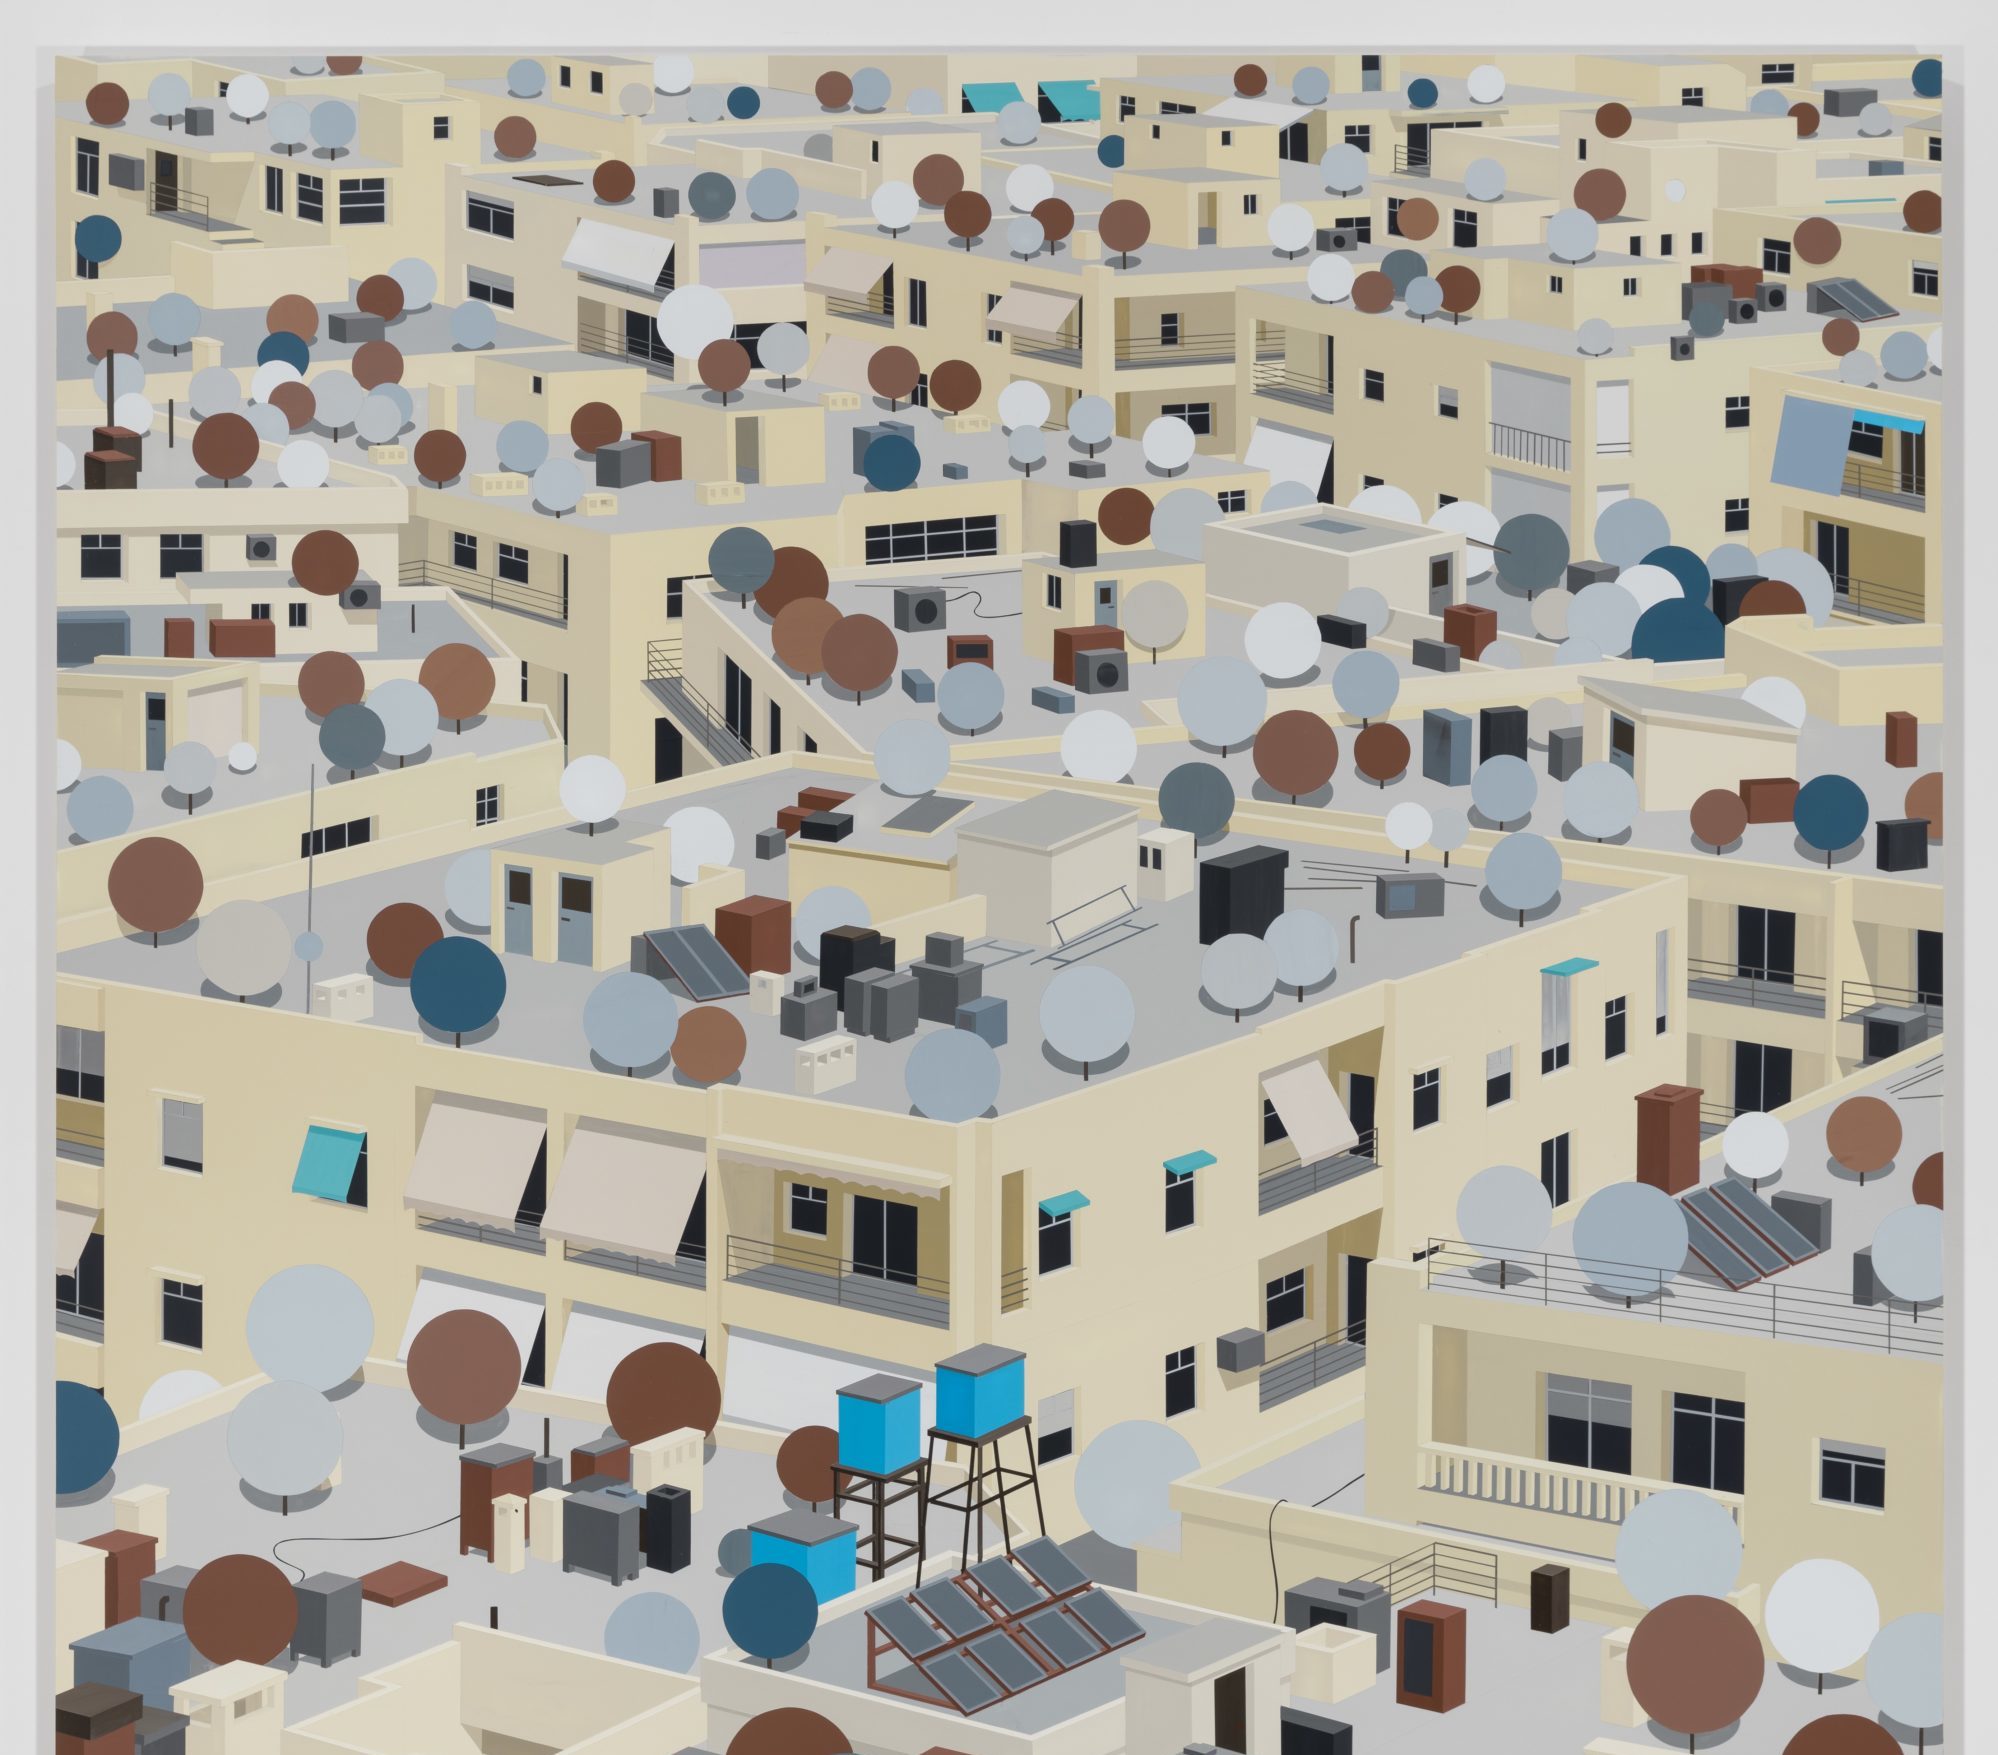 Depiction of the city Aleppo, with rooftops filled with satellite dishes.